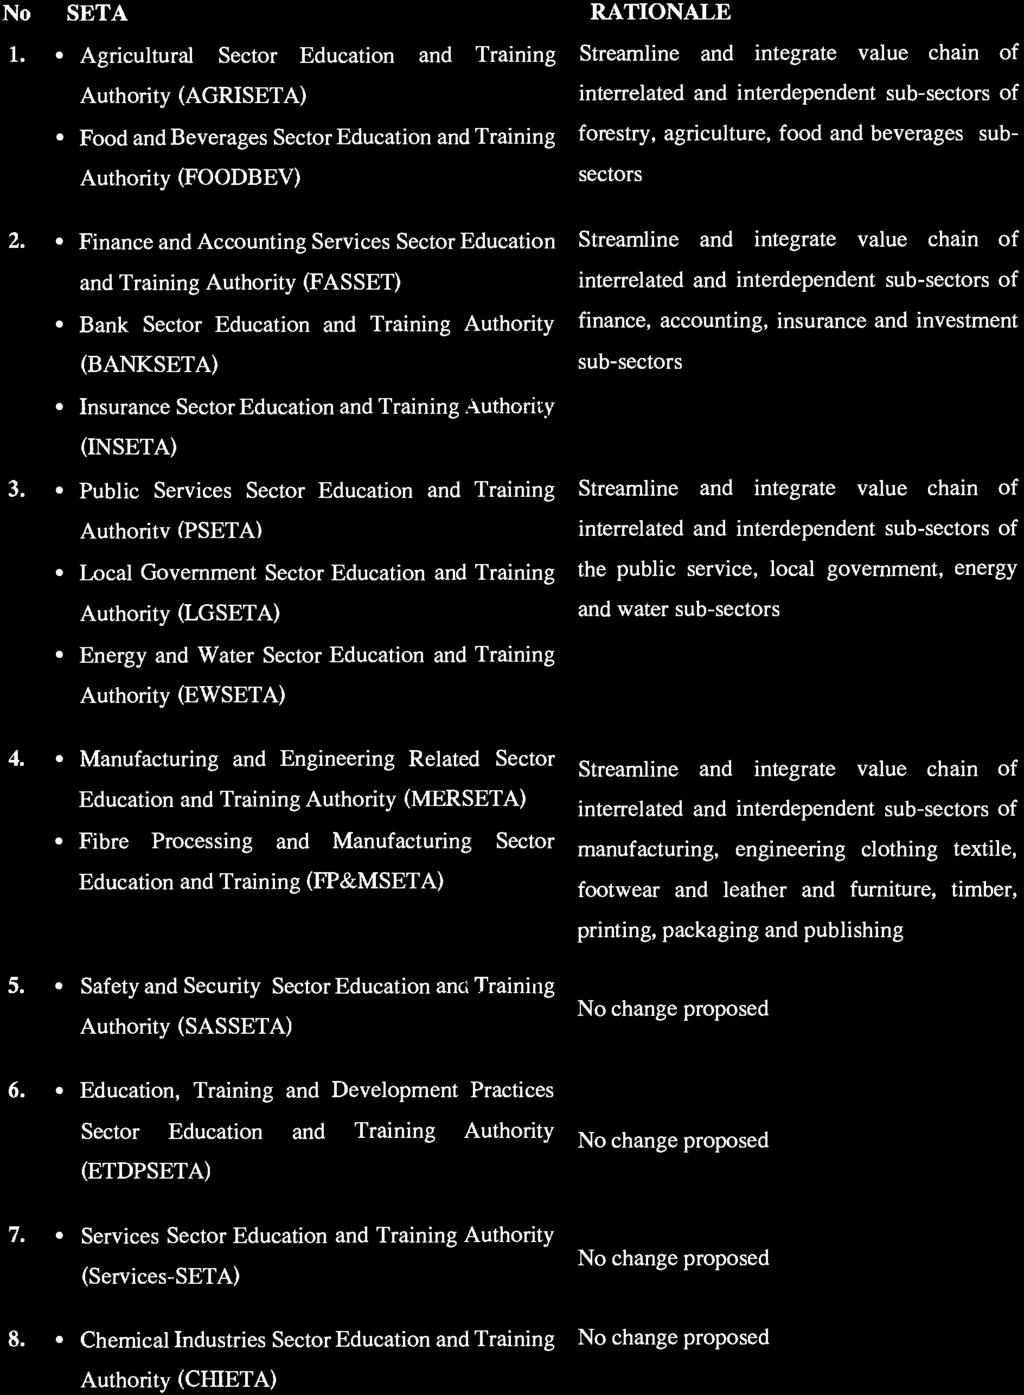 6 No. 41856 GOVERNMENT GAZETTE, 22 AUGUST 2018 No SETA 1. Agricultural Sector Education and Training Authority (AGRISETA) Food and Beverages Sector Education and Training Authority (FOODBEV) 2.